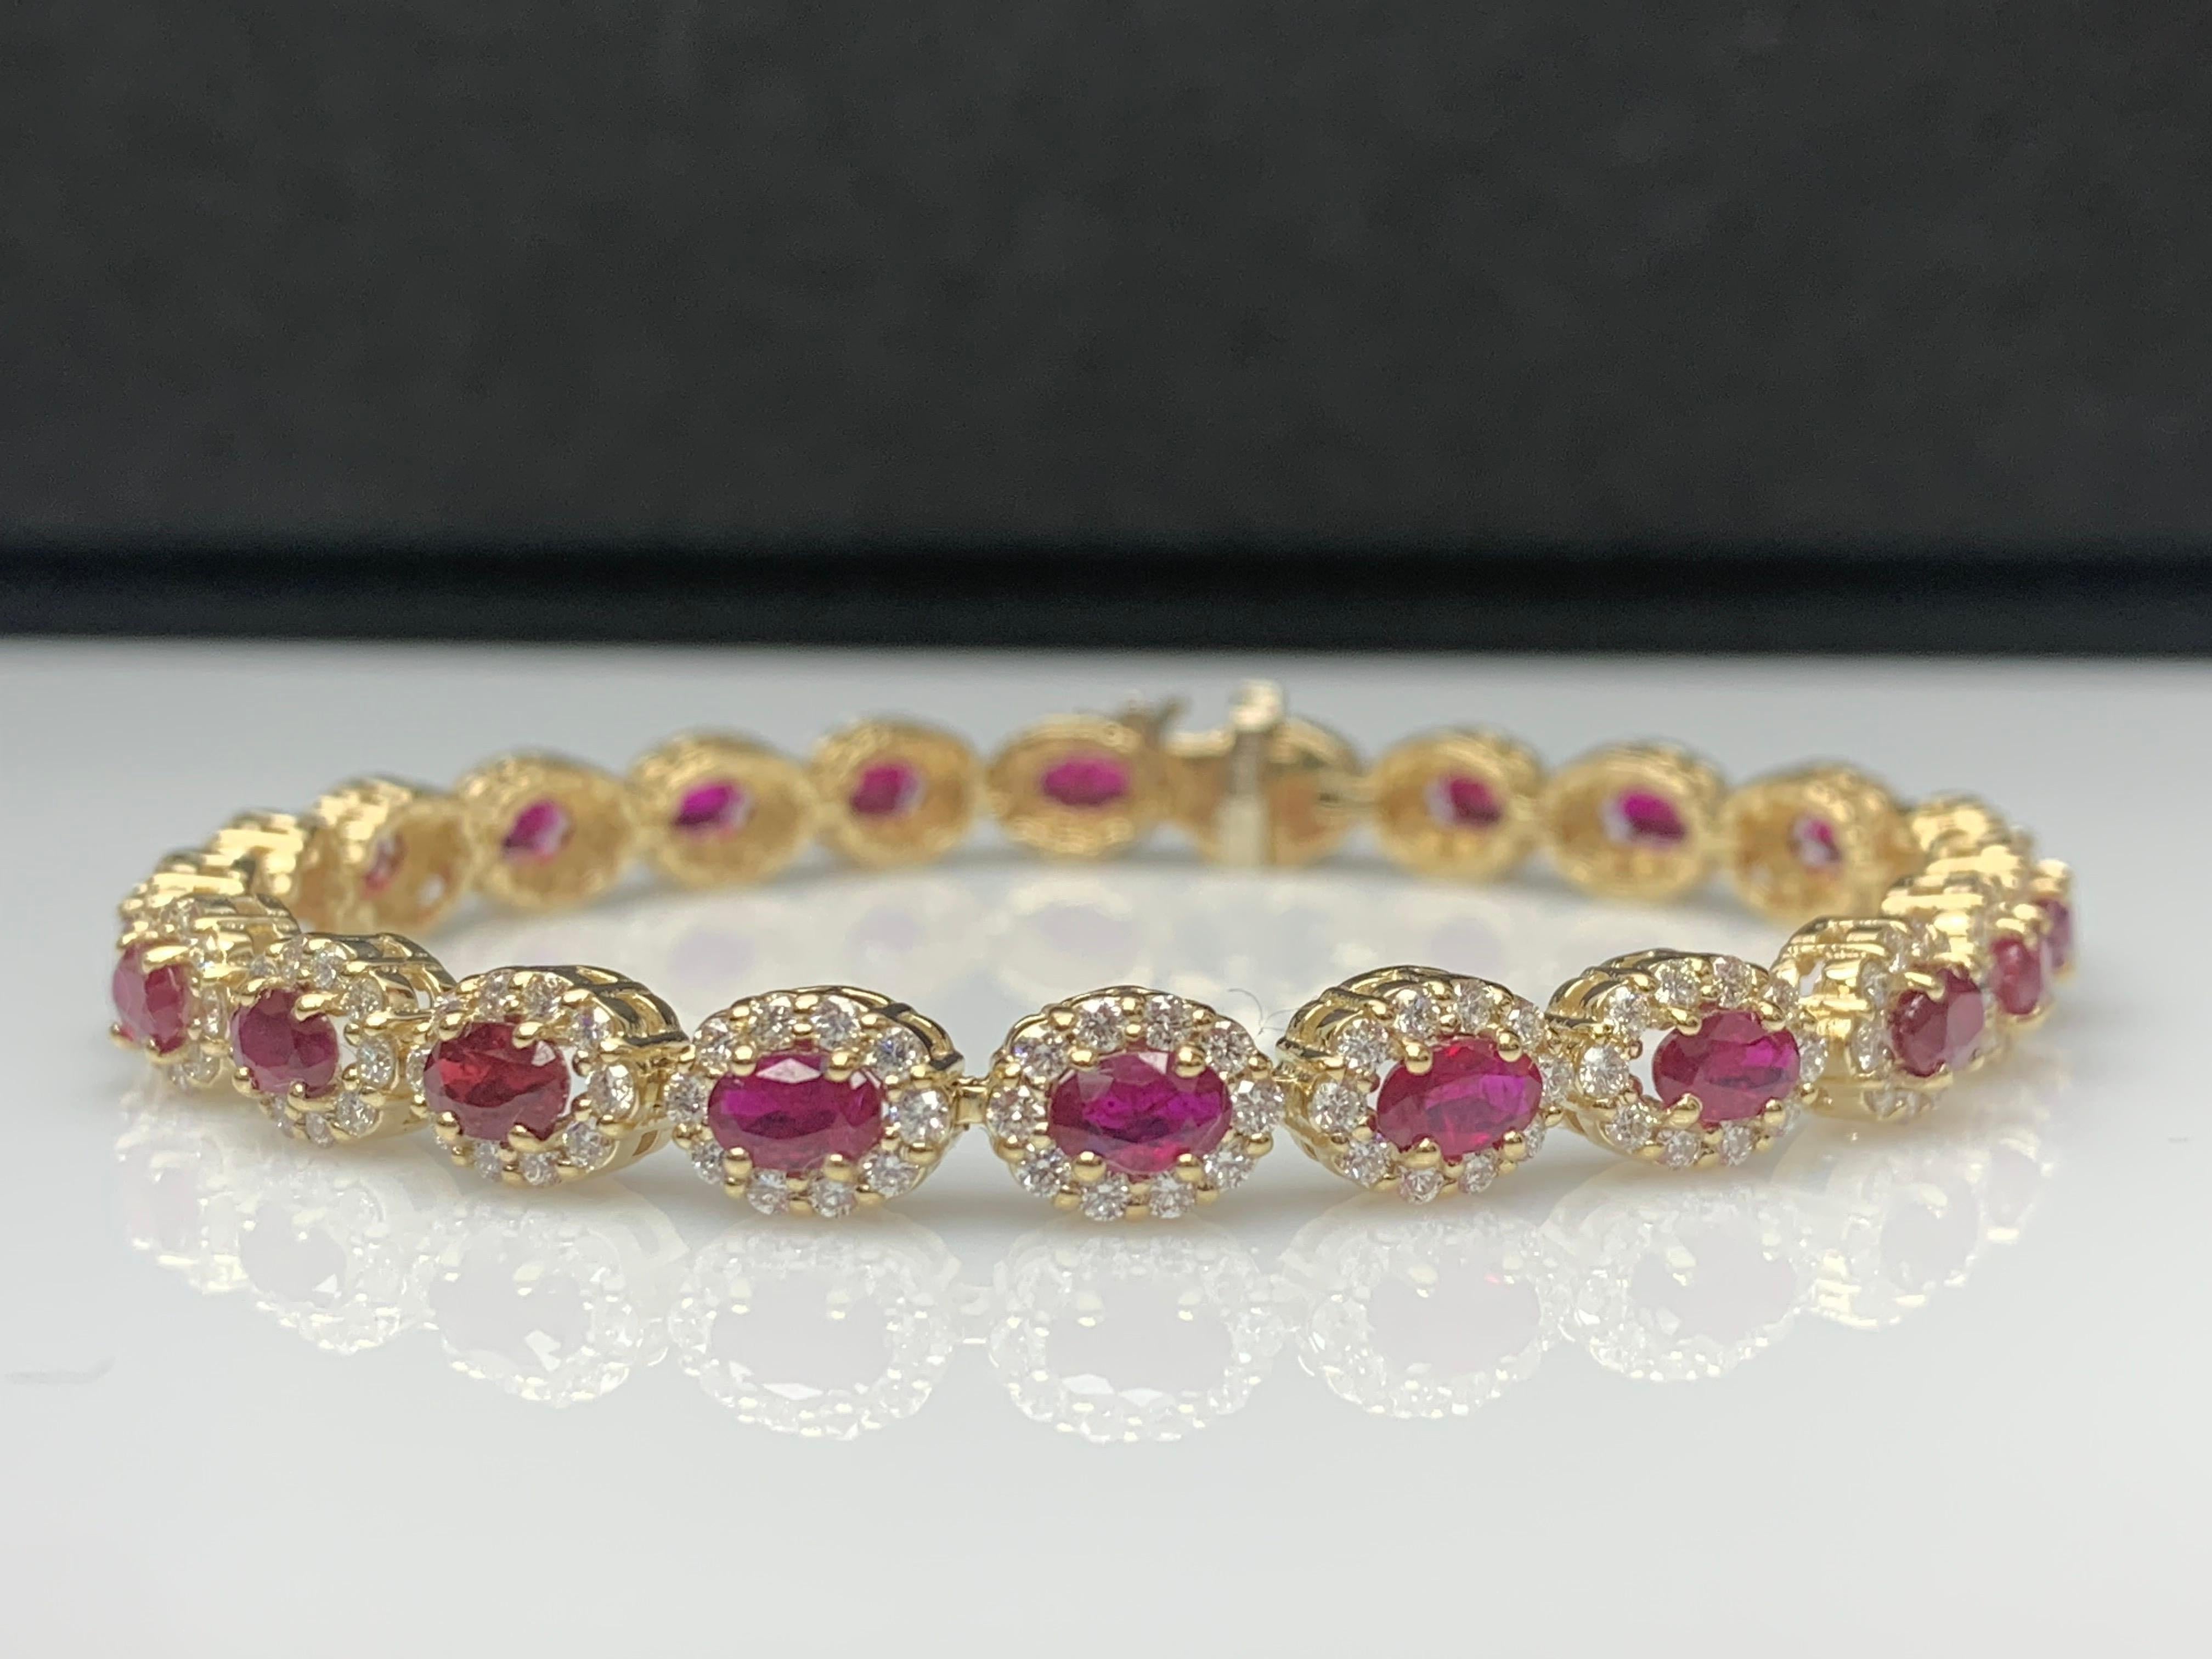 A beautiful Ruby and diamond bracelet showcasing color-rich Rubies, surrounded by a single row of brilliant round diamonds. 22 Oval cut rubies weigh 6.43 carats total; 220 accent diamonds weigh 3.08 carats total.

Style is available in different